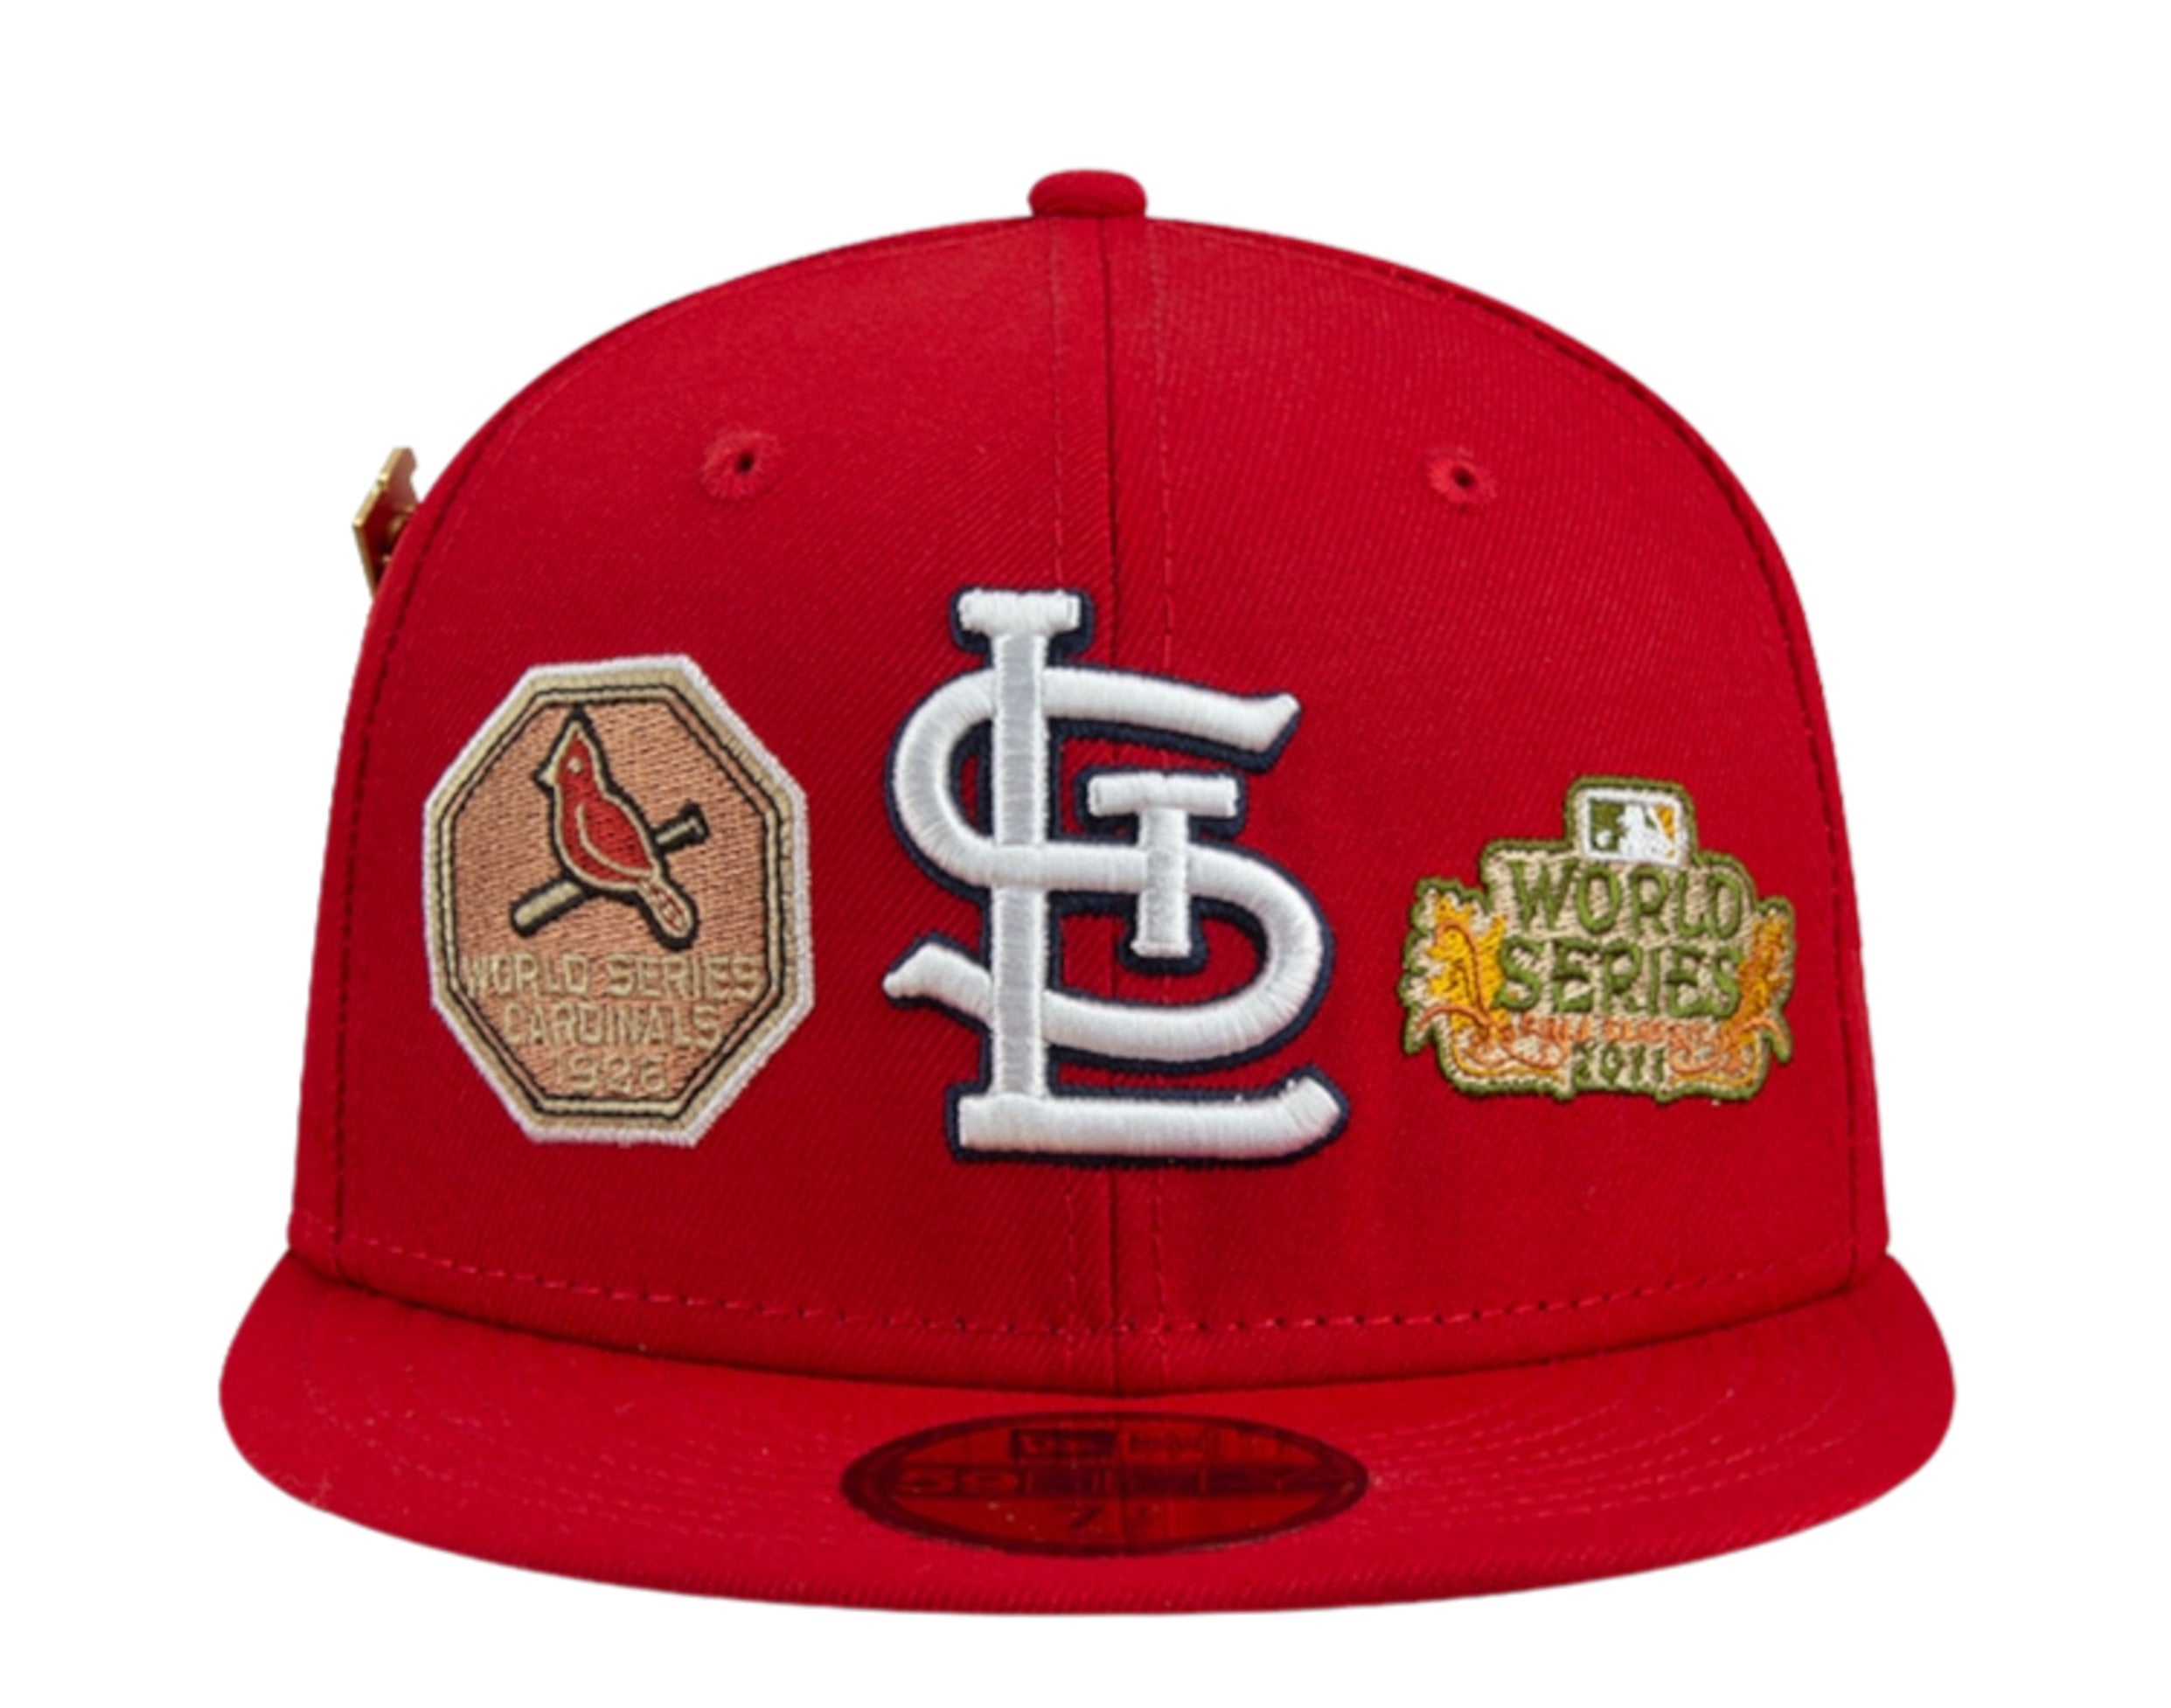 St. Louis Cardinals Tiramisu 59FIFTY Fitted Hat, Brown - Size: 7 7/8, MLB by New Era